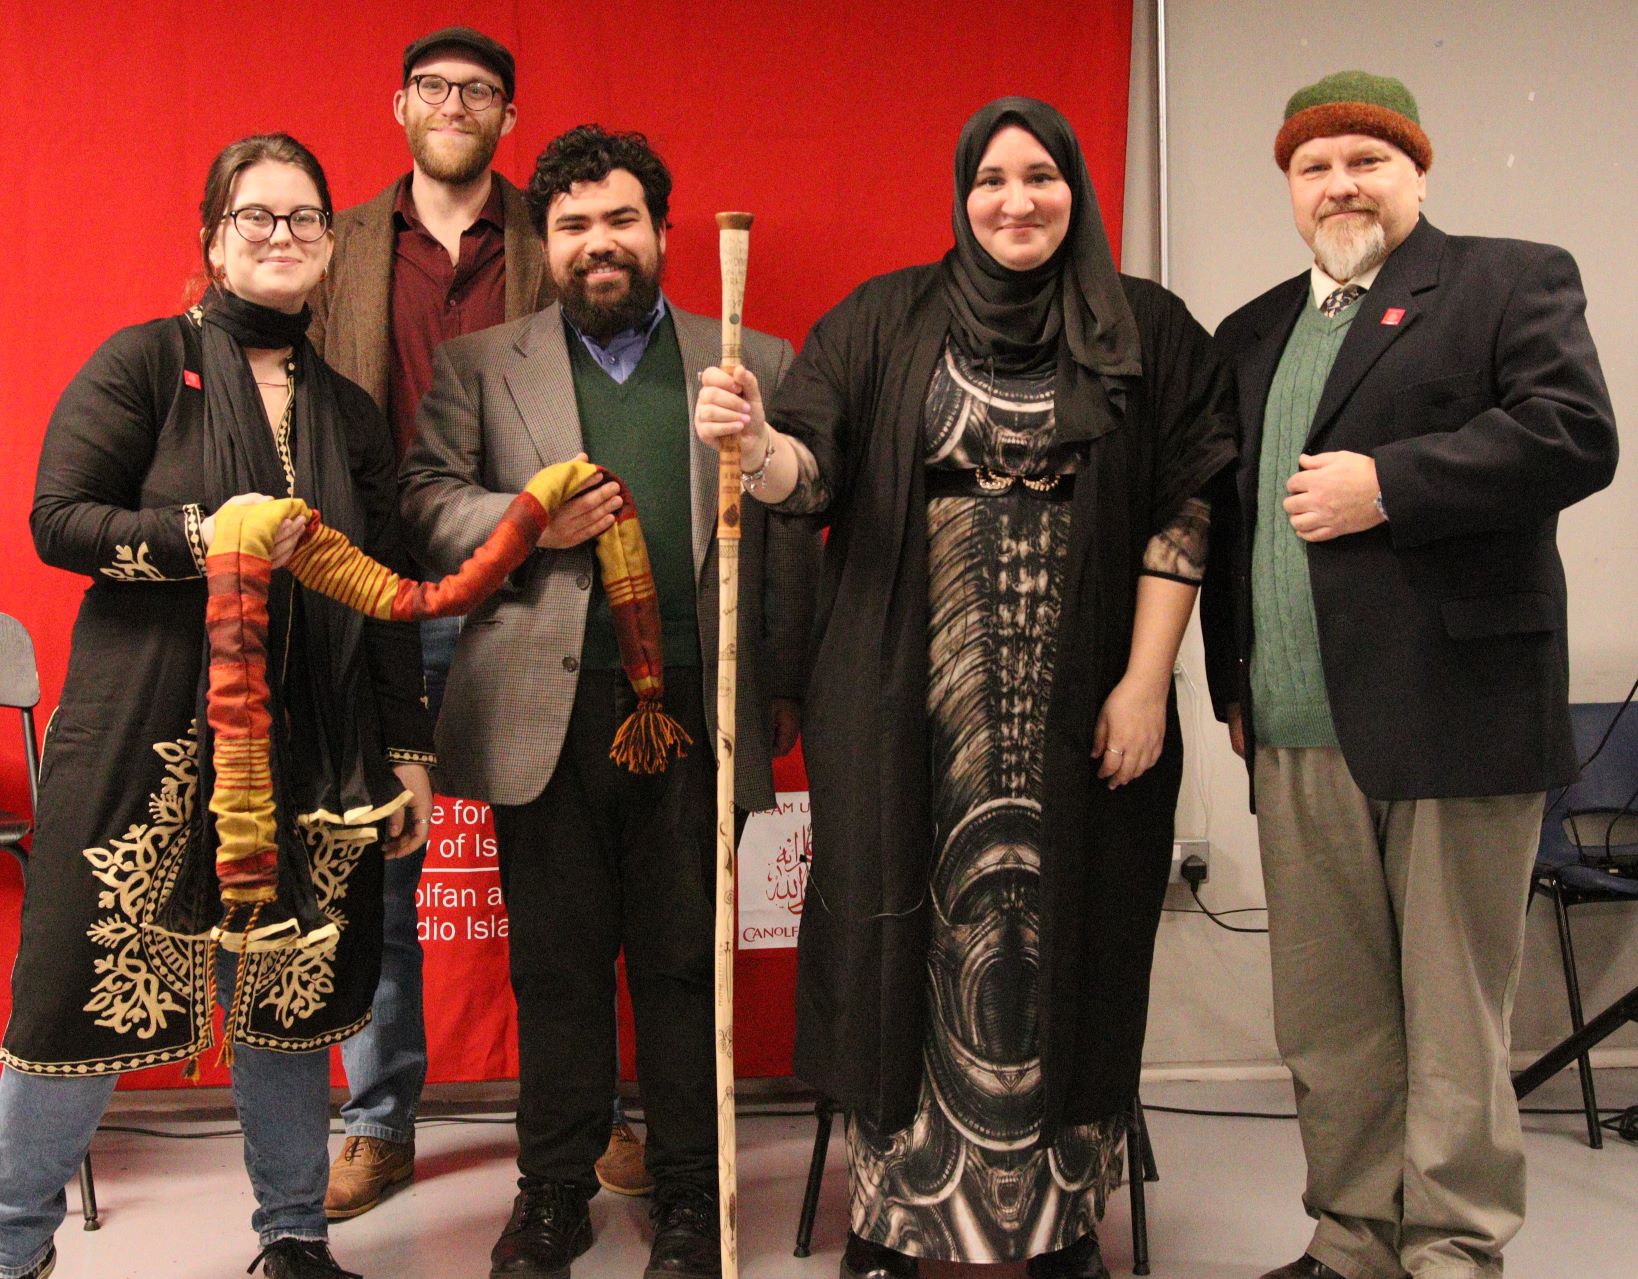 A group of people stand before a red banner. In the centre, a Muslim woman poet in hijab carries a crafted and decorated wooden staff. On either side are men wearing wool jumpers, blazers, and beards. The younger one is next to a young woman in glasses, and they carry between them a fabric bag. Behind them, a taller bespectacled man with beard and cap is standing. All are smiling.